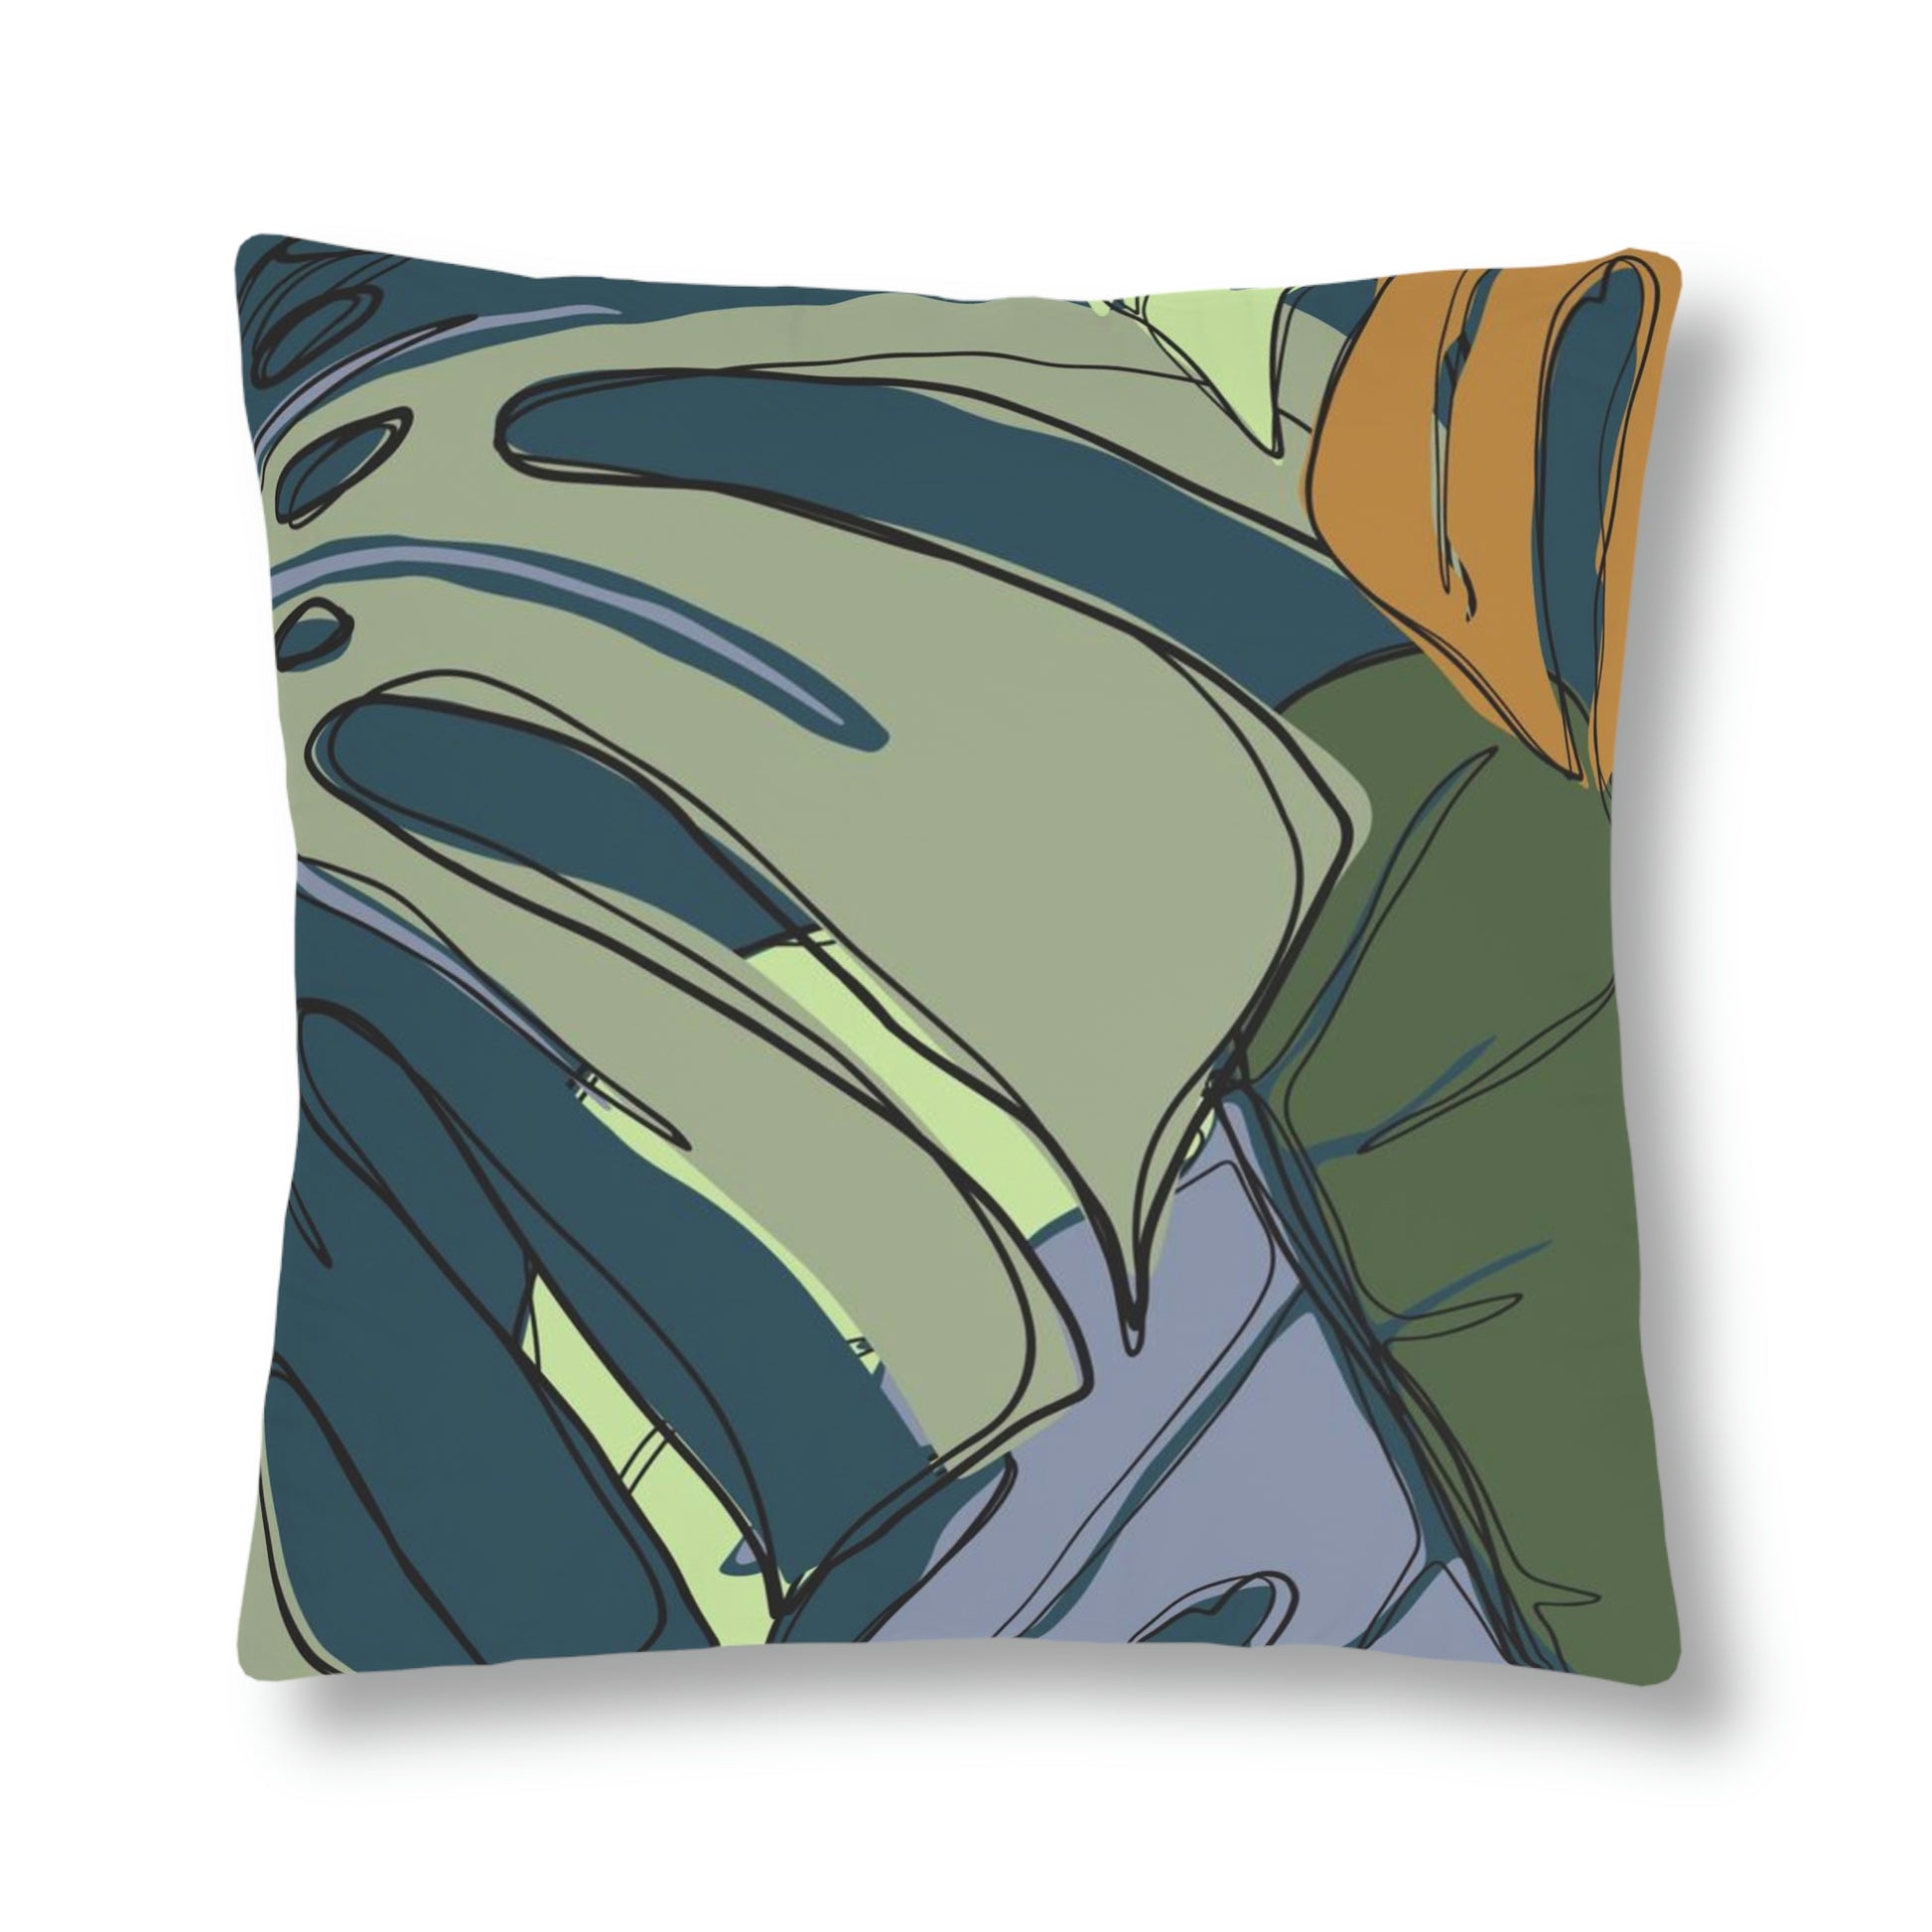 Hawaii Monstera Collection Waterproof Pillows, Tropical Custom Designed Monstera Leaf Pillows for your Pool Area